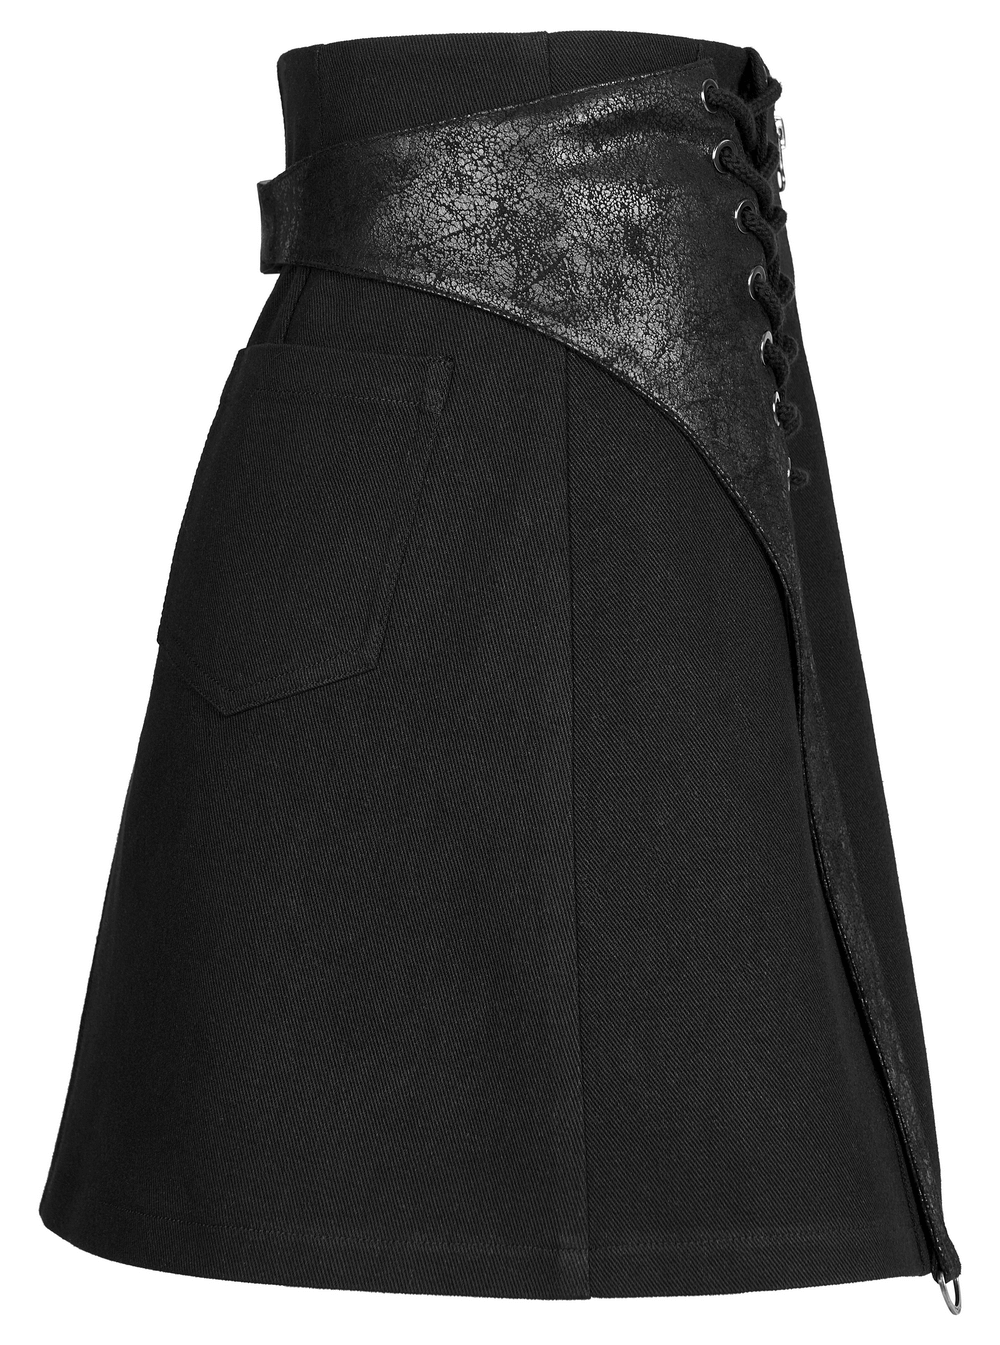 Punk Rave Black High Waist Skirt with Zipper and Detachable Pieces